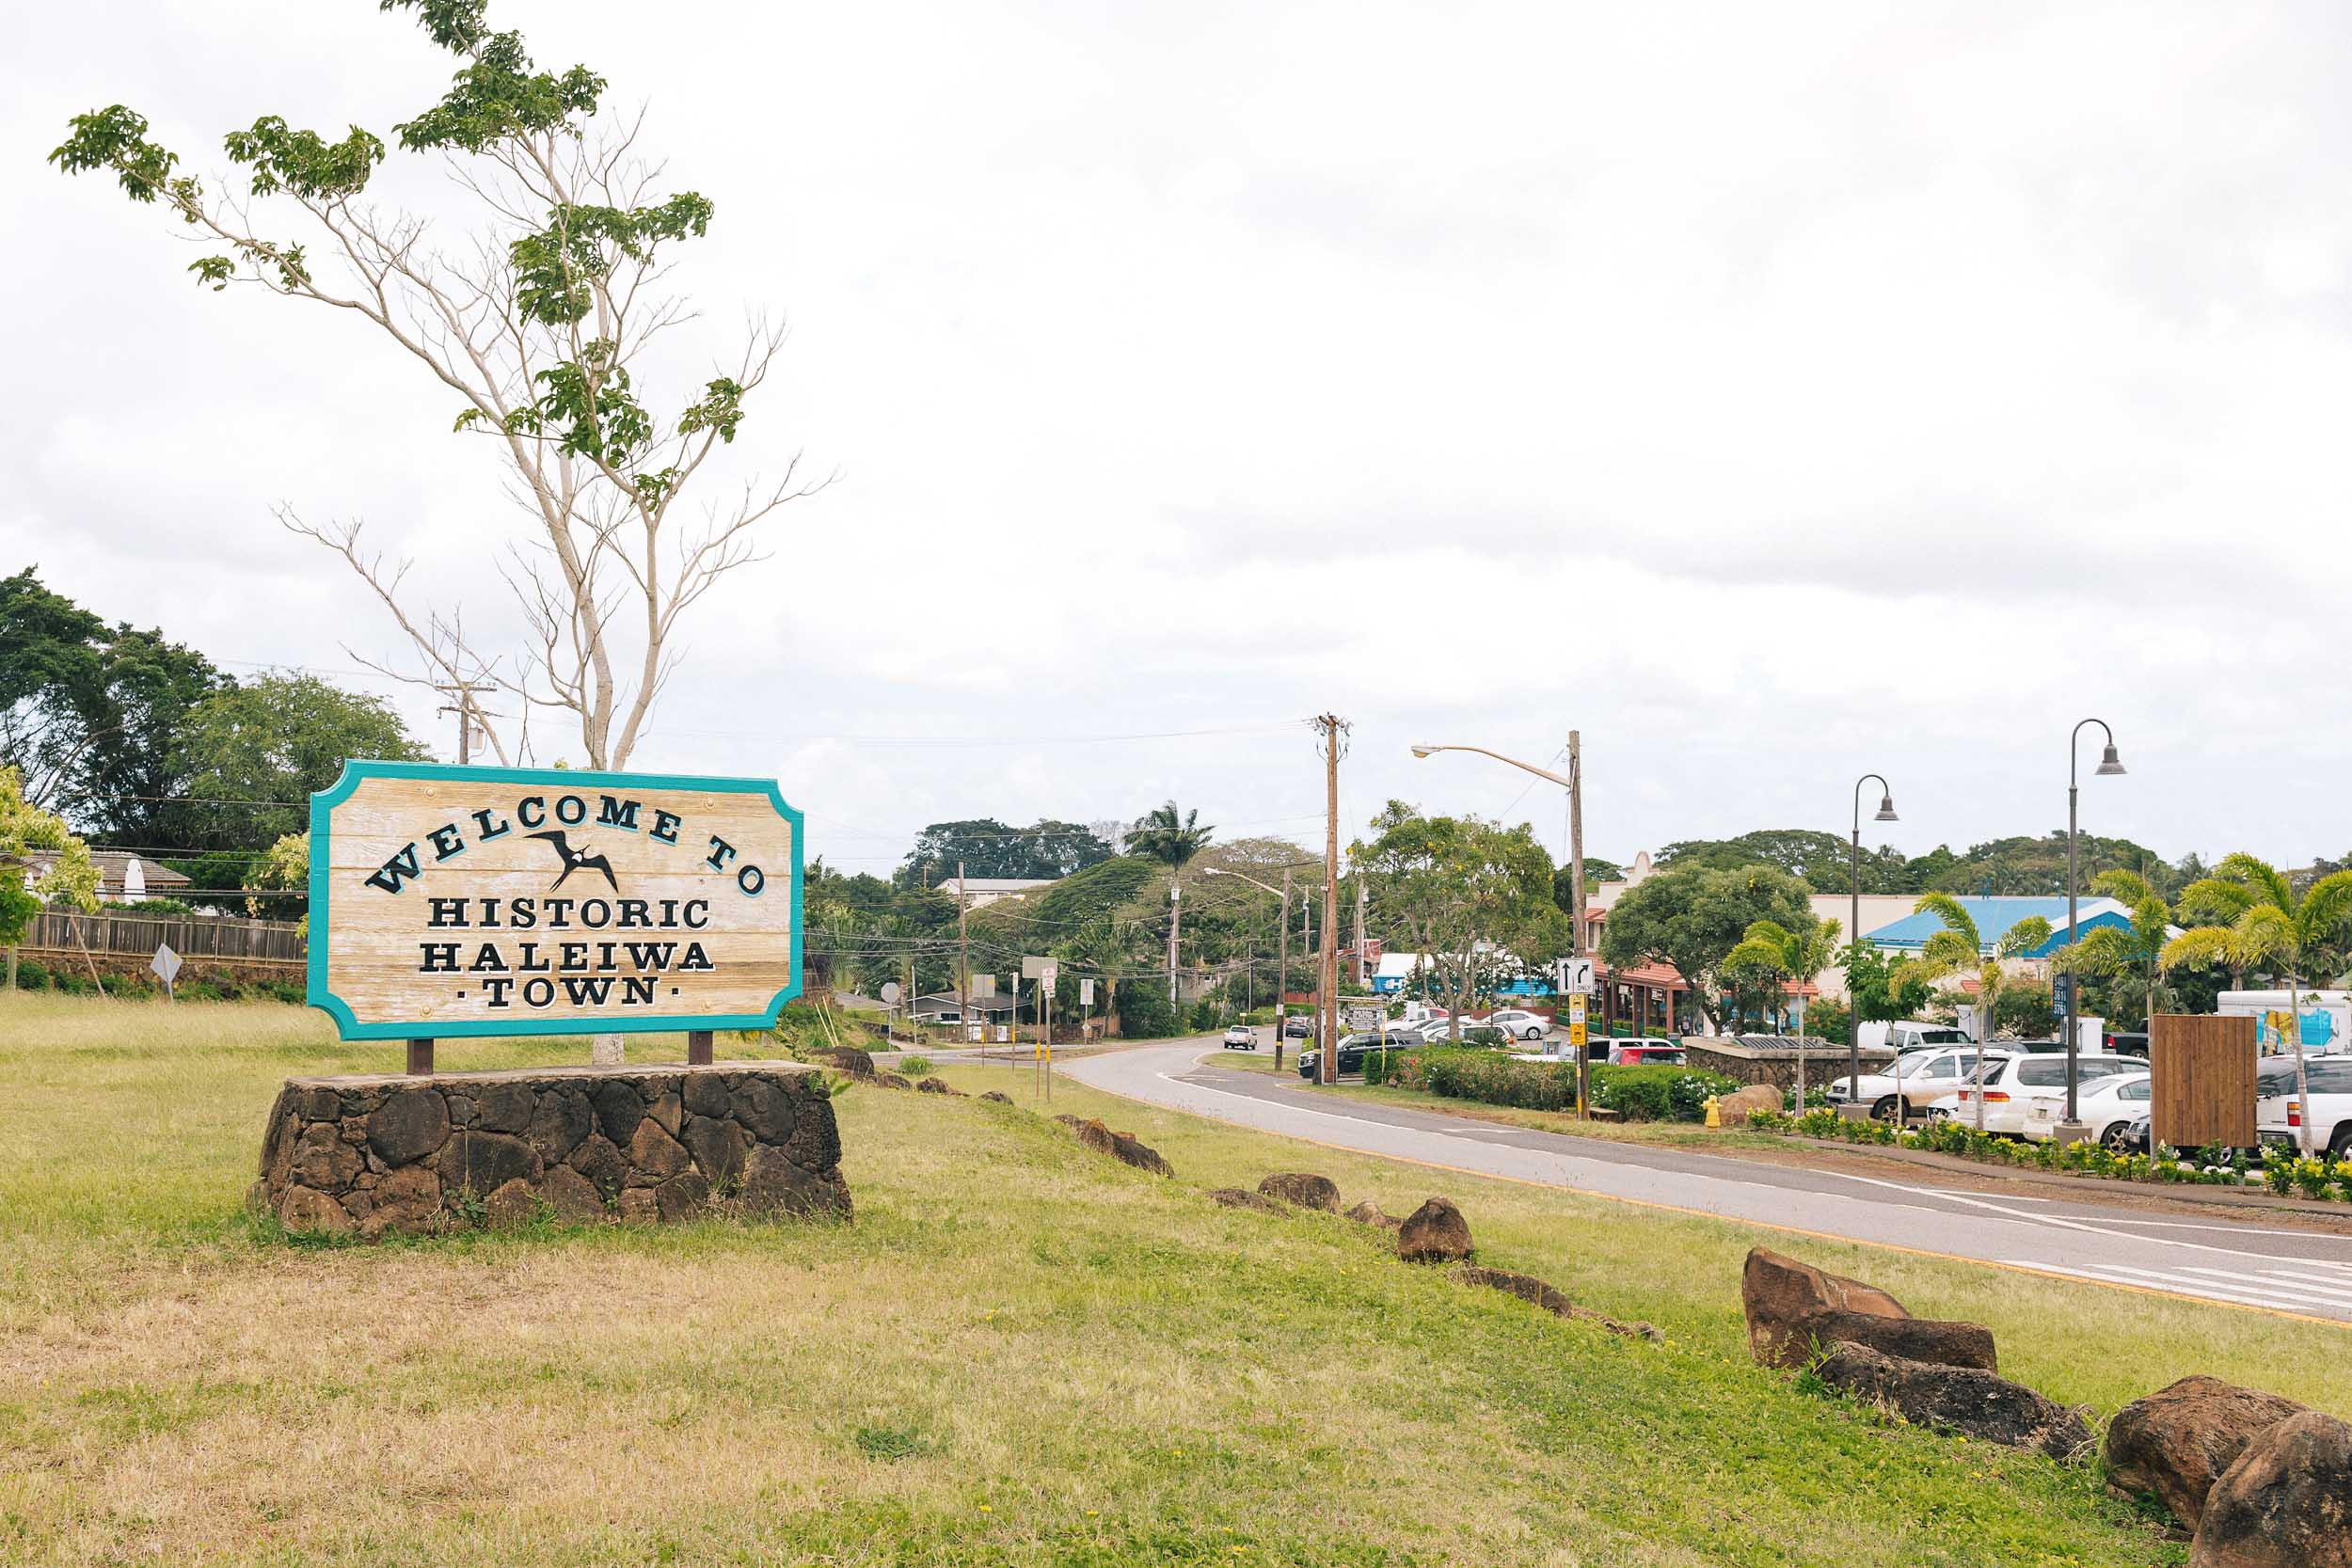 Welcome to historic Haleiwa Town!